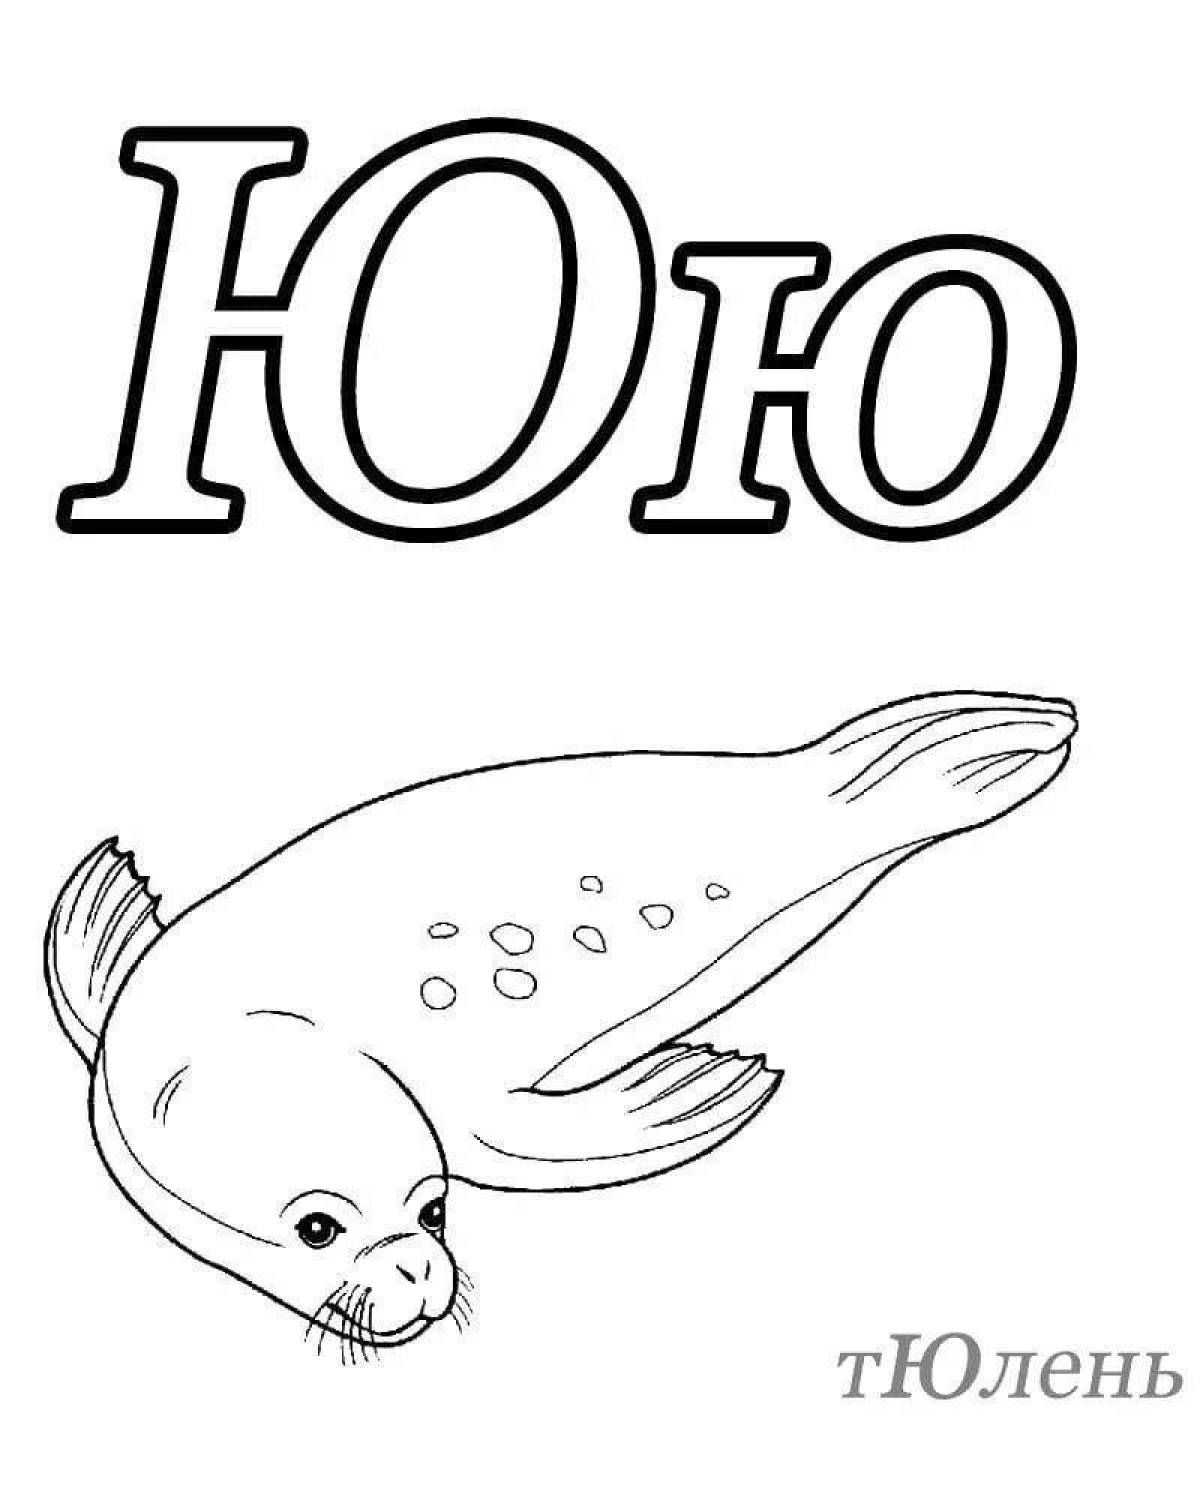 Exciting letter u coloring page